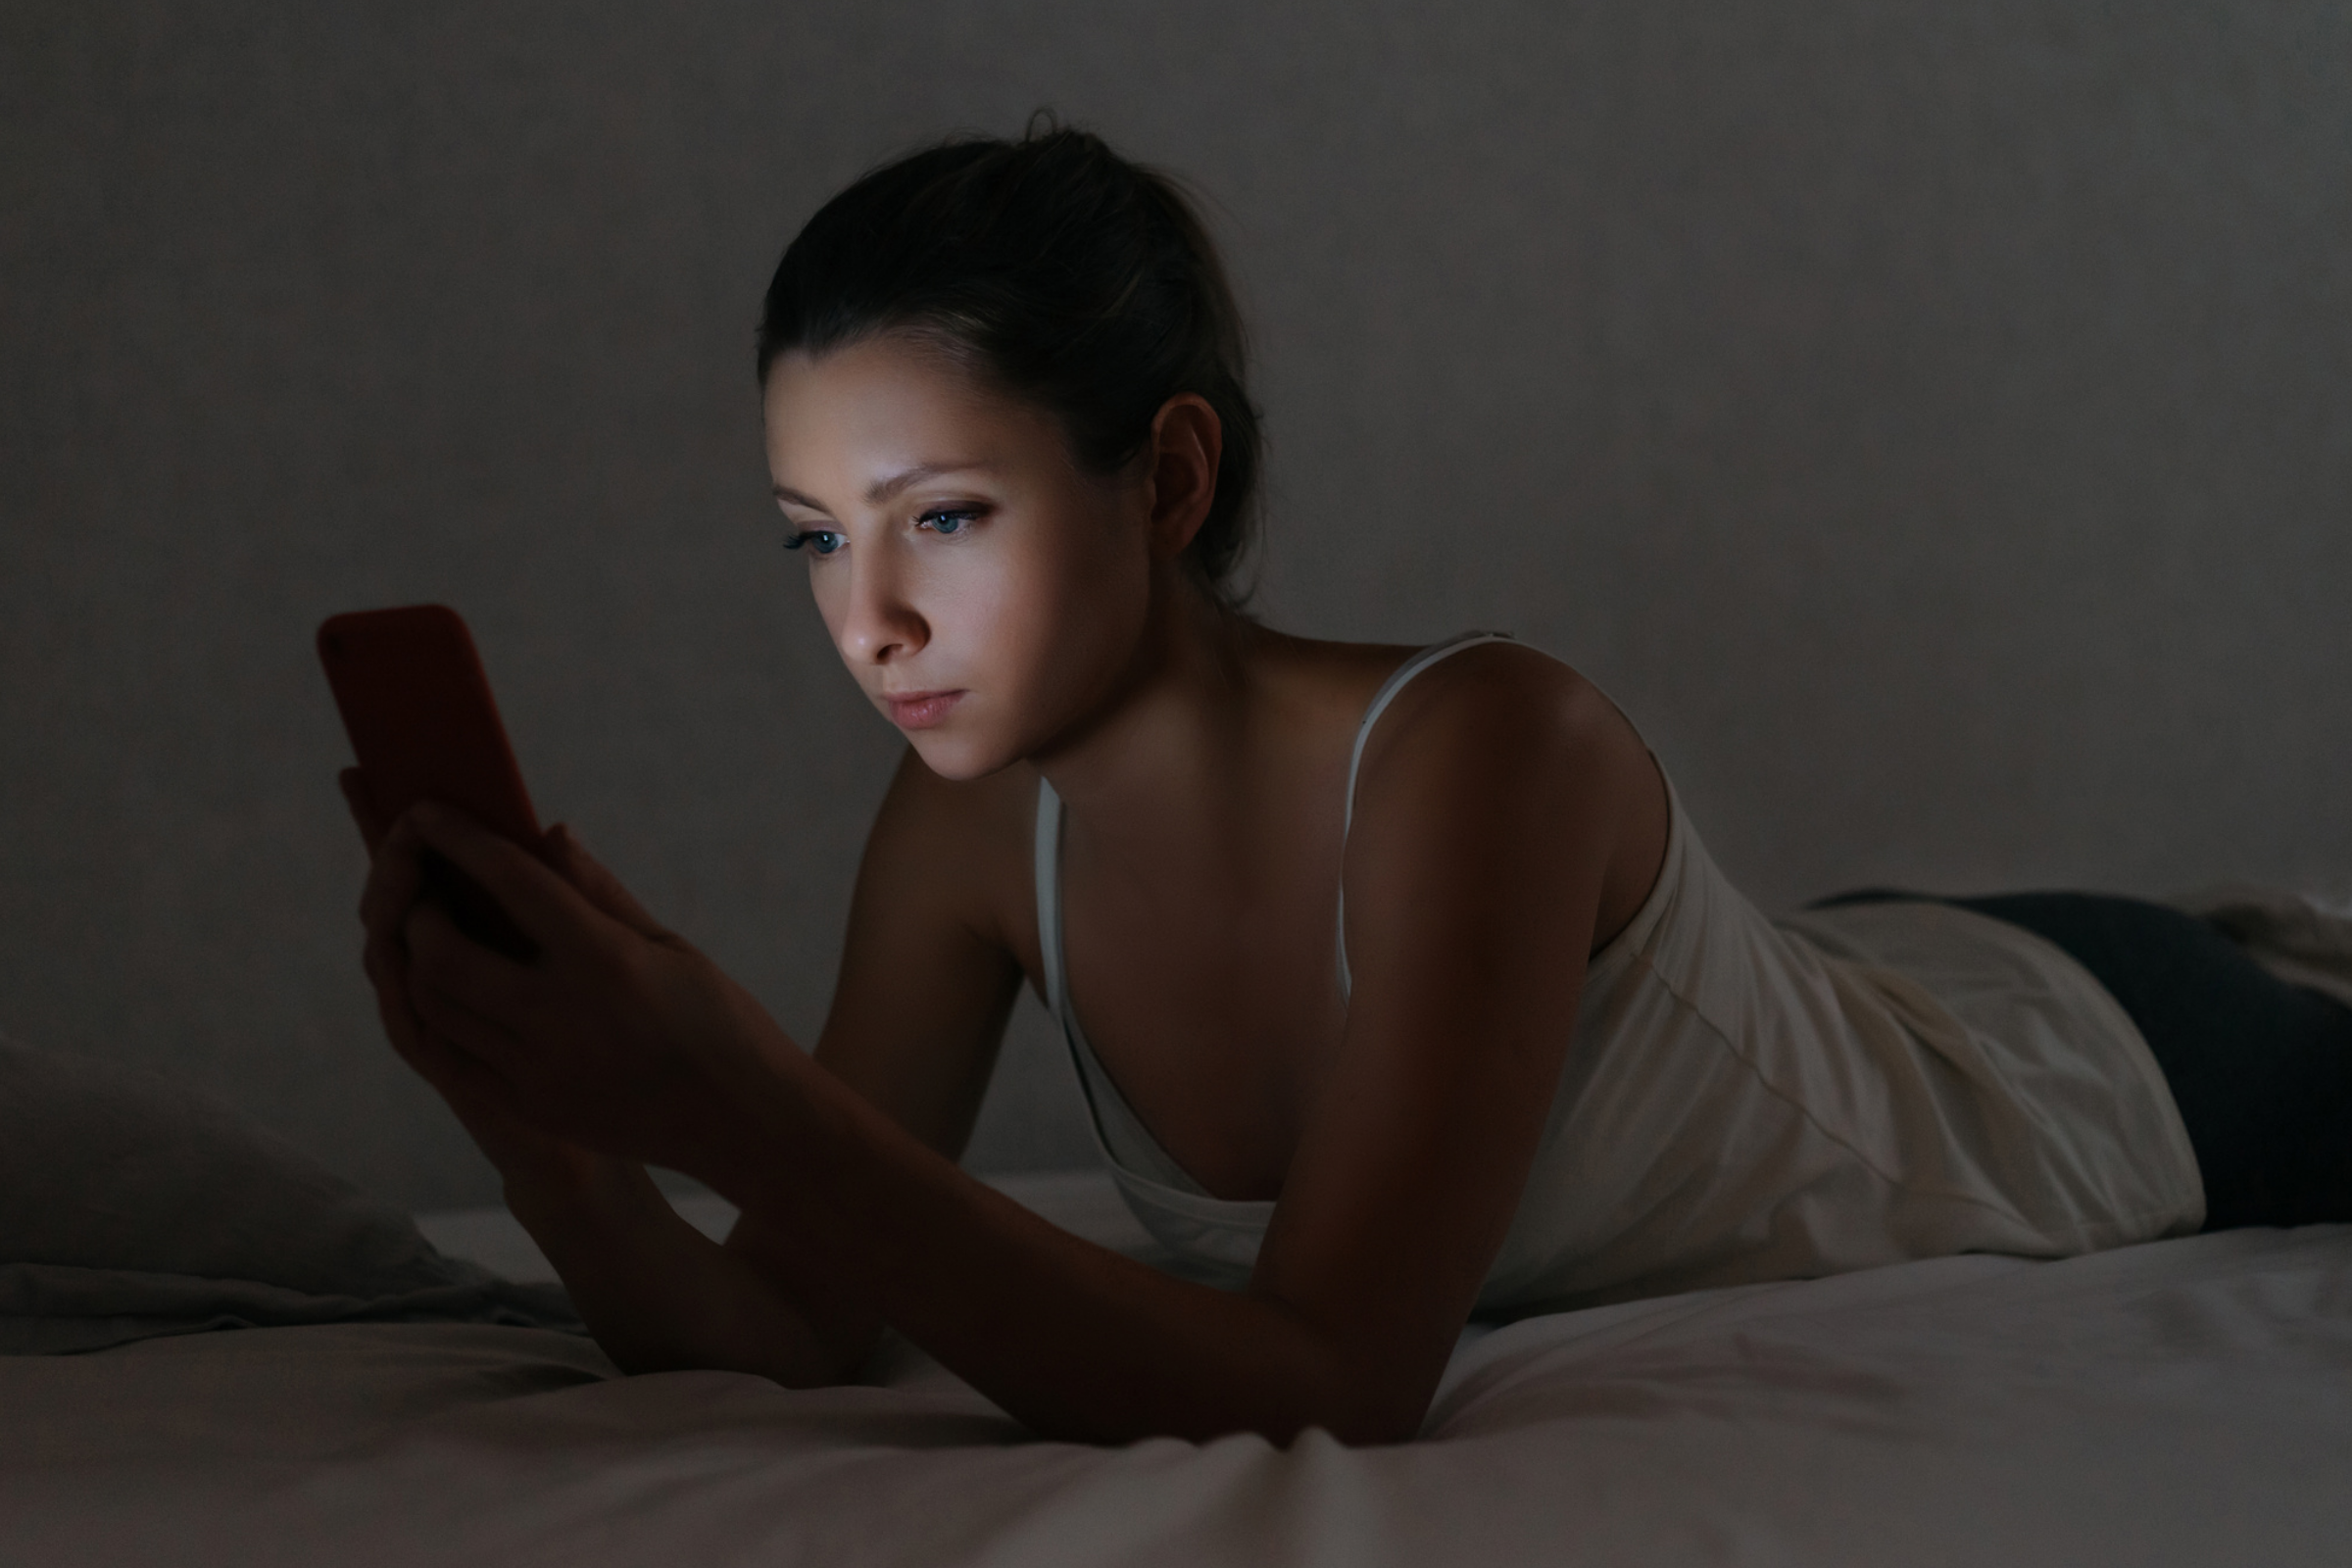 woman looking at phone in bed